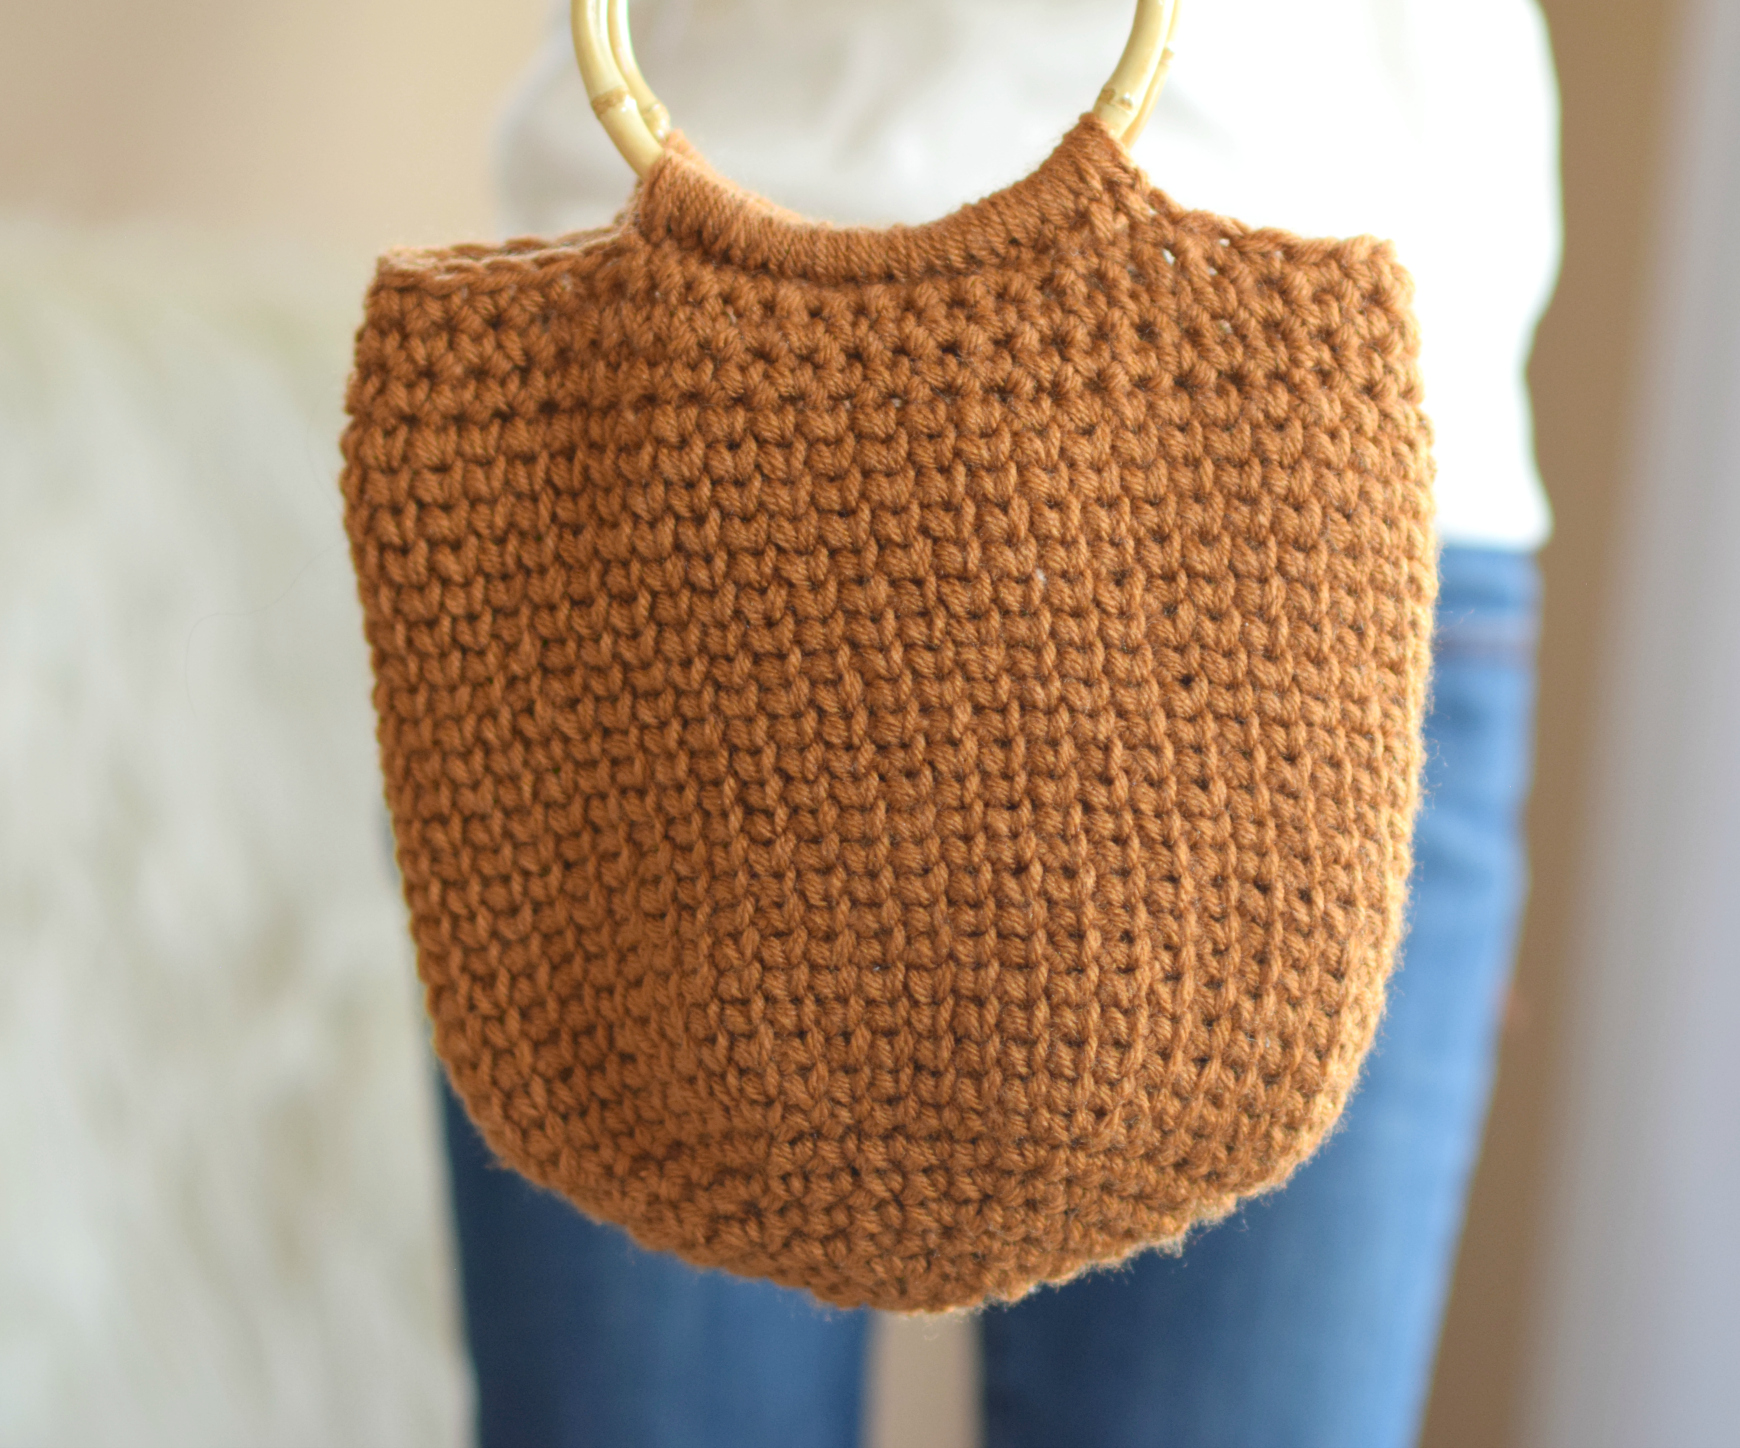 Simple Striped Tote Bag - Free Crochet Tote Bag Pattern - A Crocheted  Simplicity